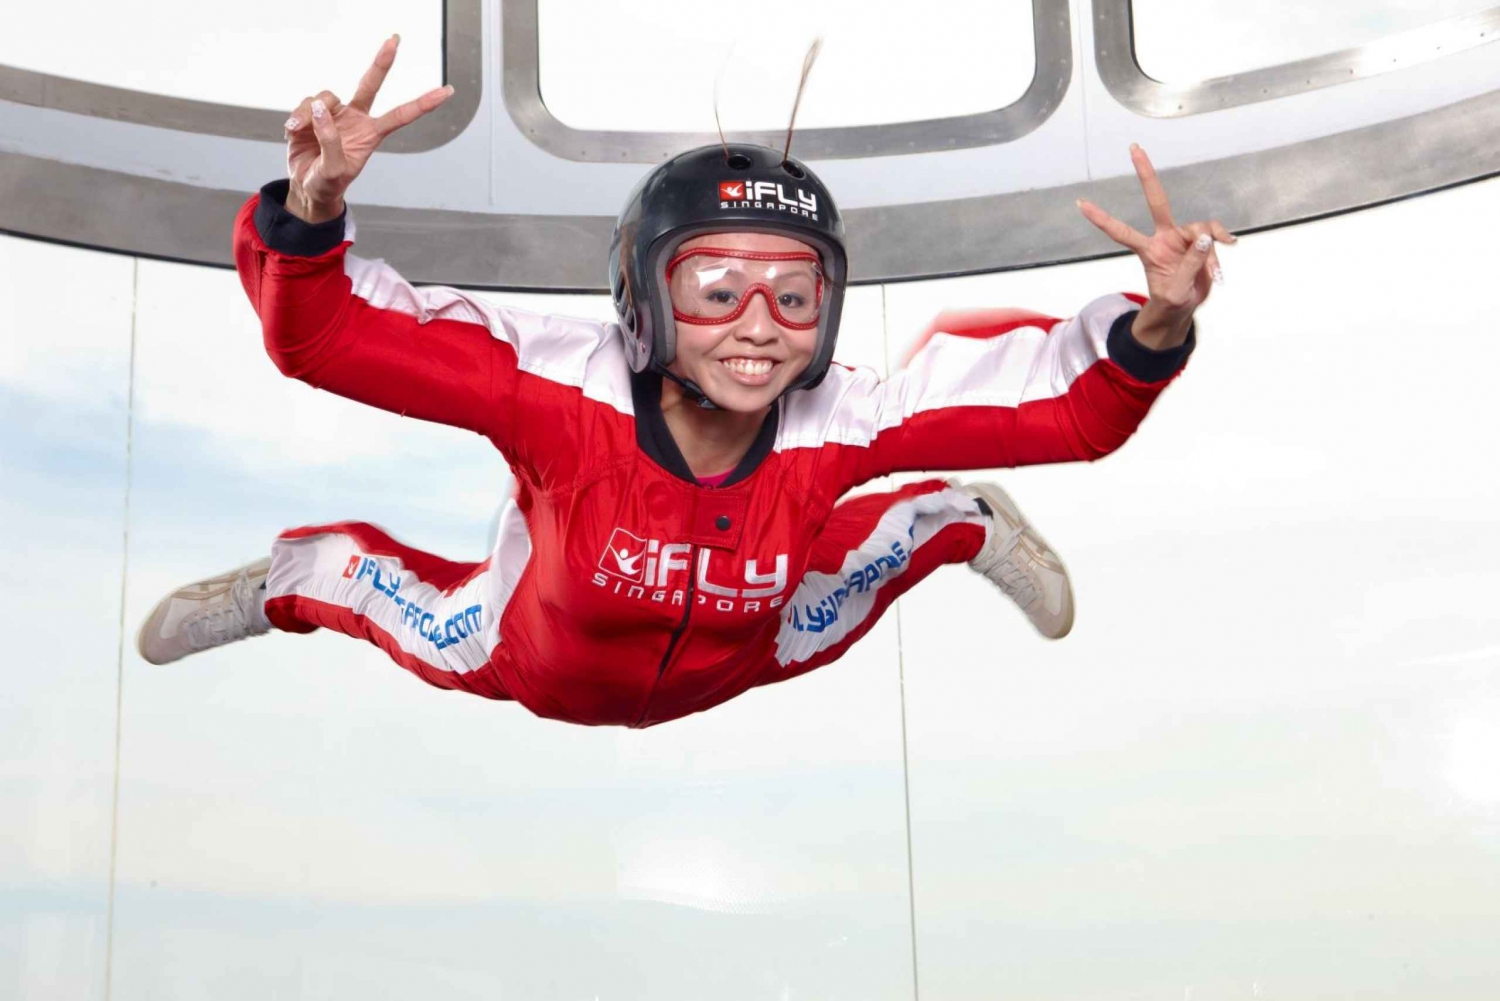 Singapore: iFly Singapore Ticket for 2 Skydives